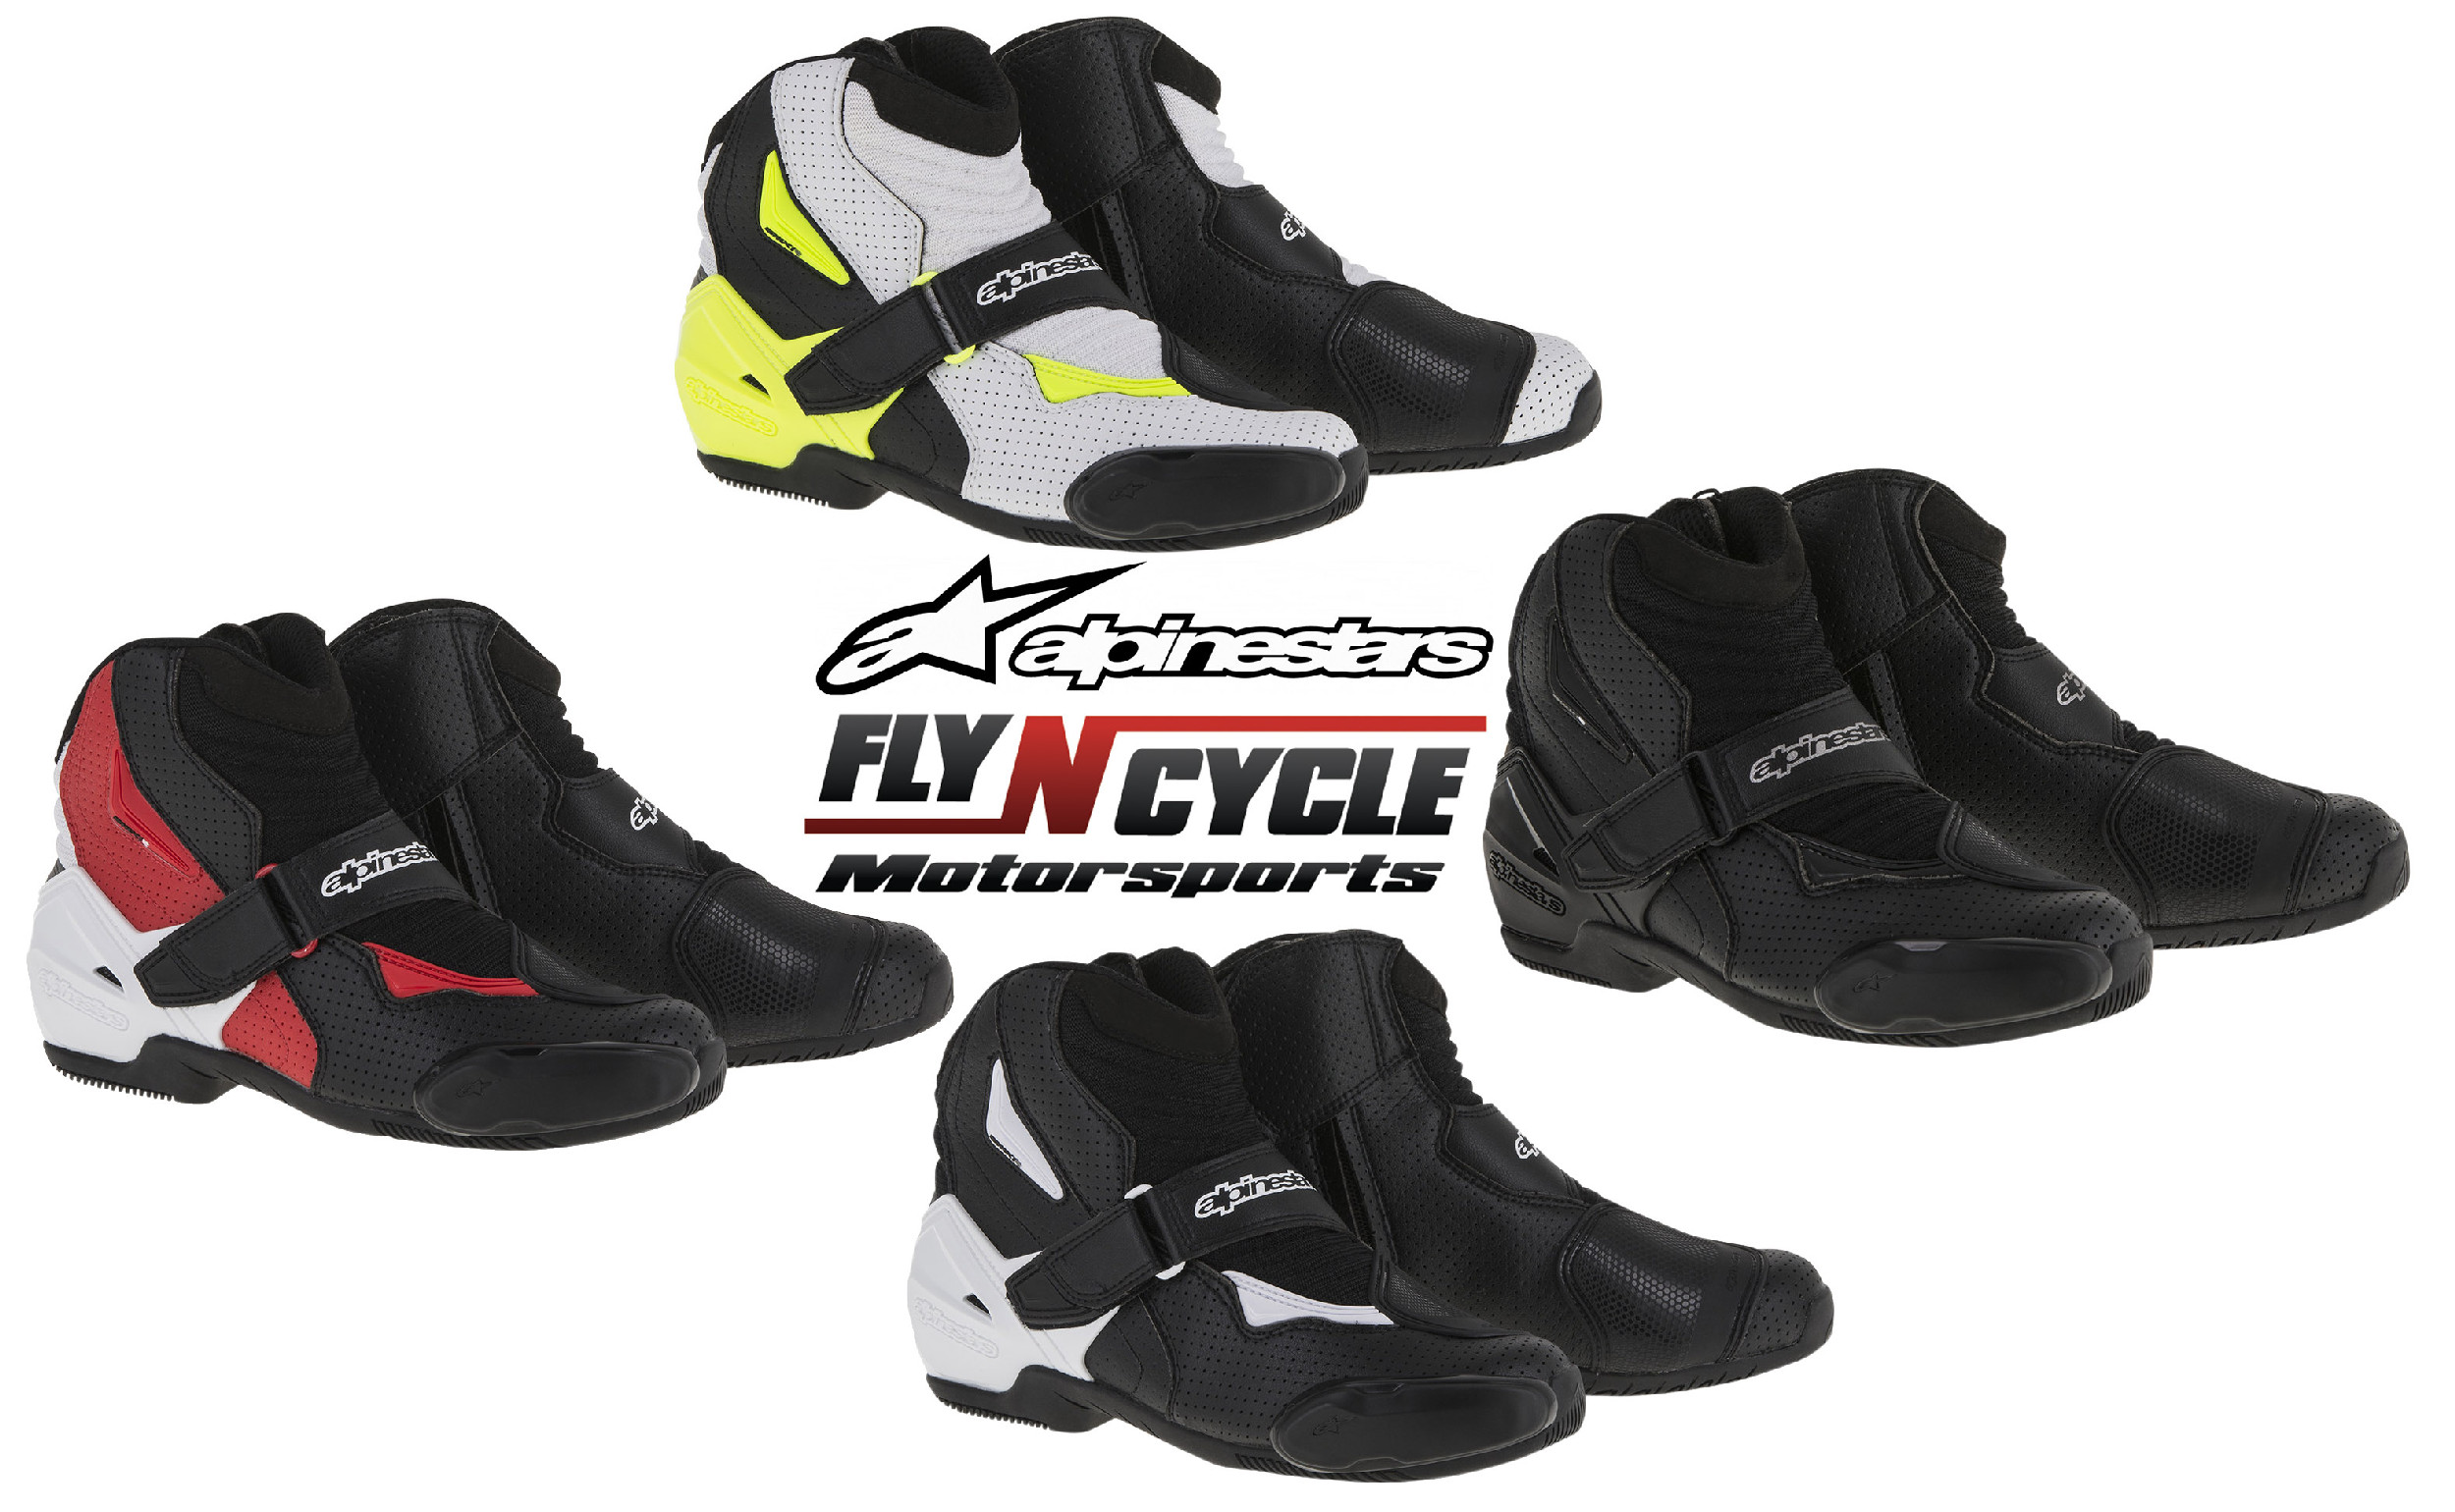 Alpinestars SMX-1R Vented Street Riding Motorcycle Boots Mens All Sizes